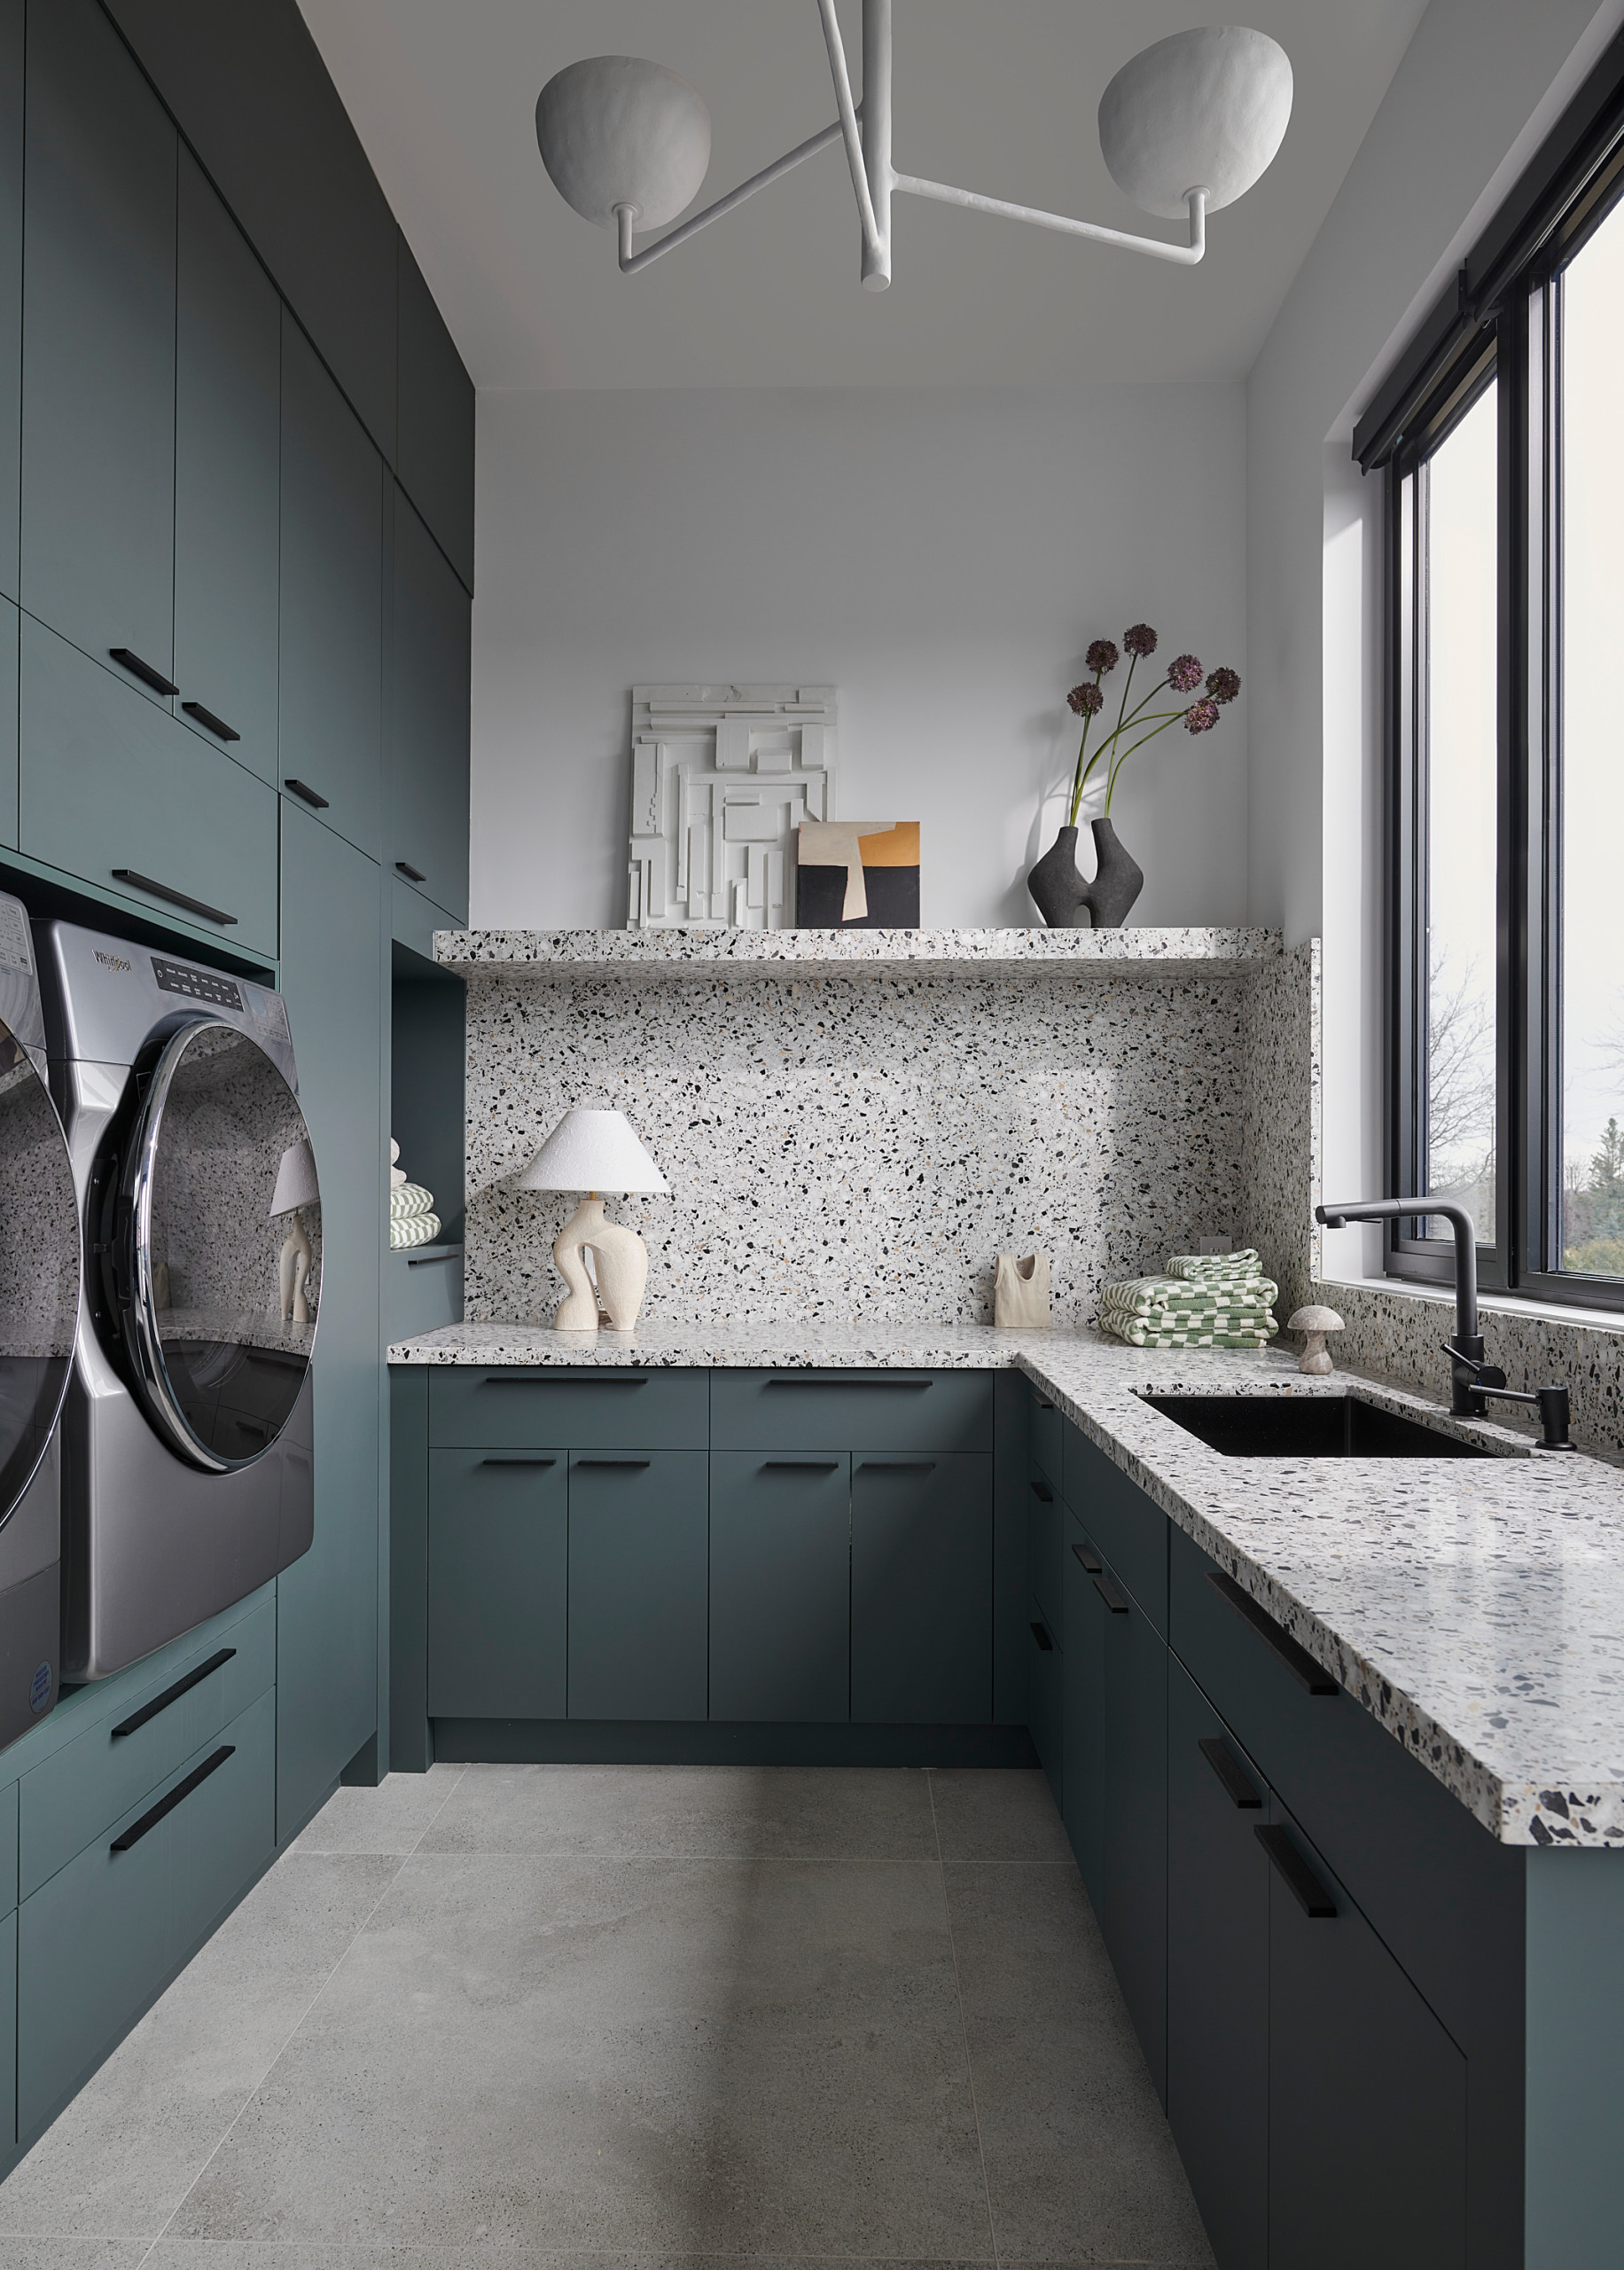 How To Support A Laundry Room Countertop Over A Washer And Dryer - Rambling  Renovators